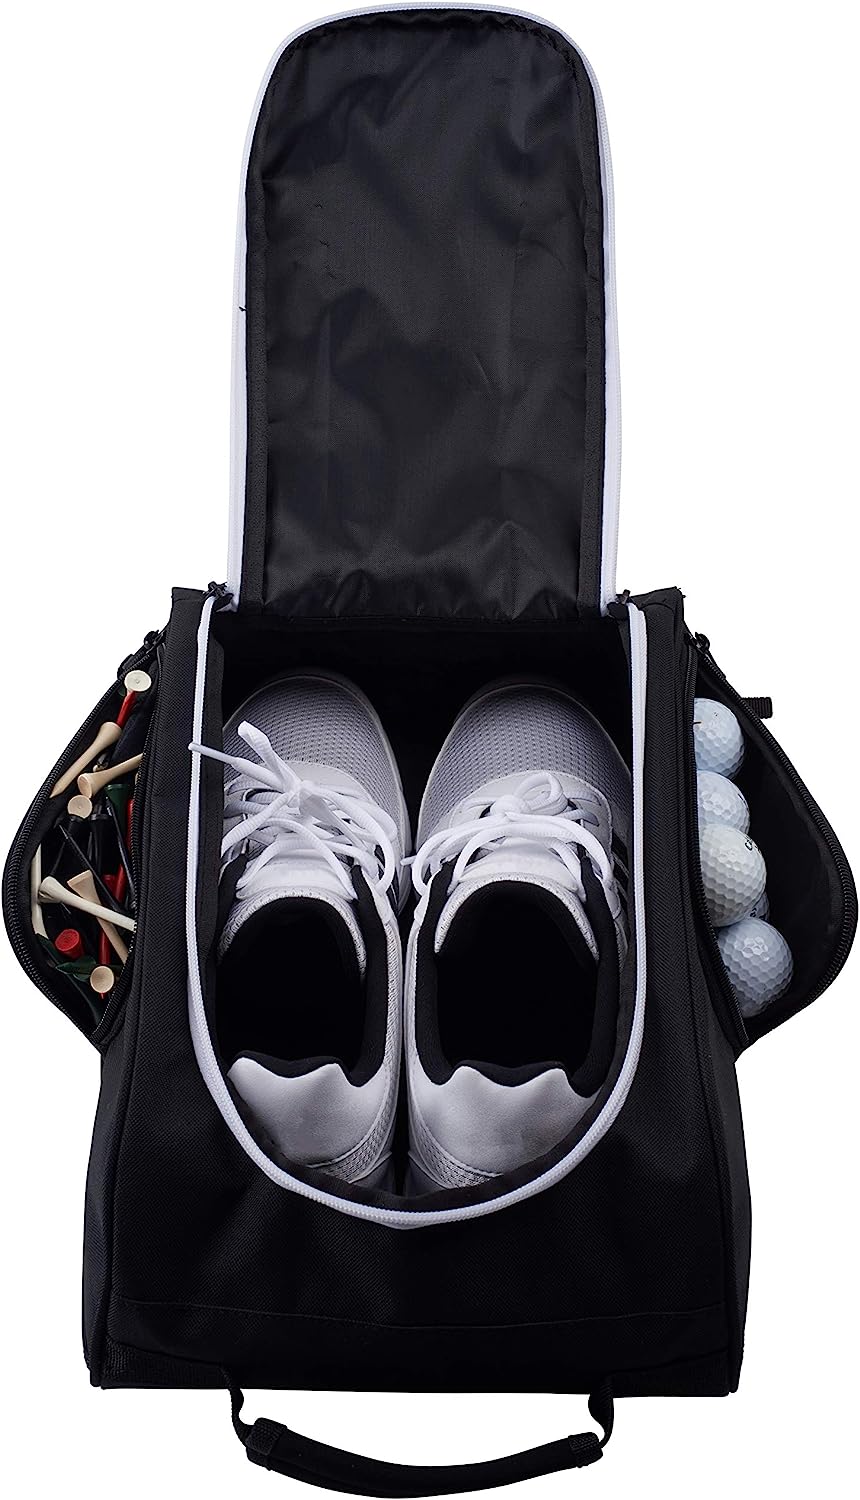 Athletico Golf Shoe Bag - Zippered Shoe Carrier Bags [...]